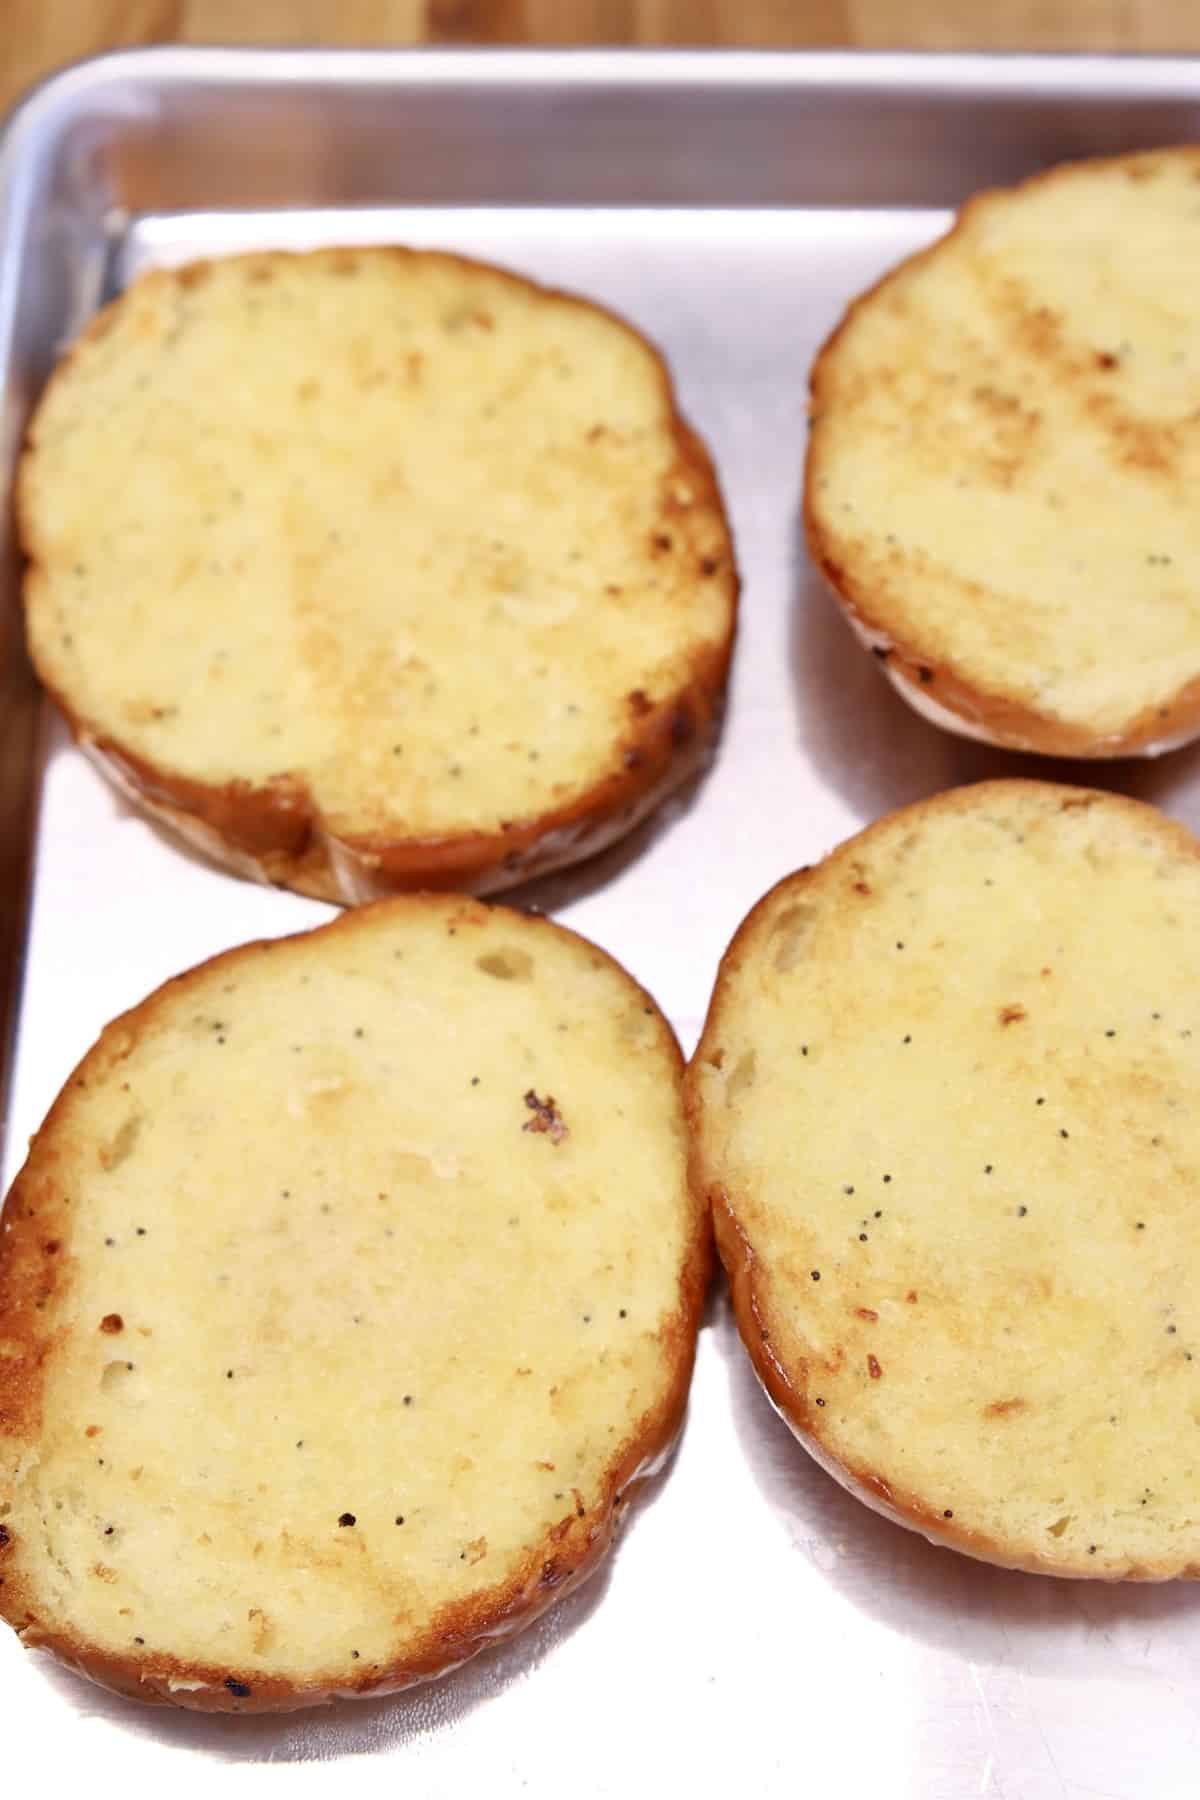 Buttered and toasted buns.